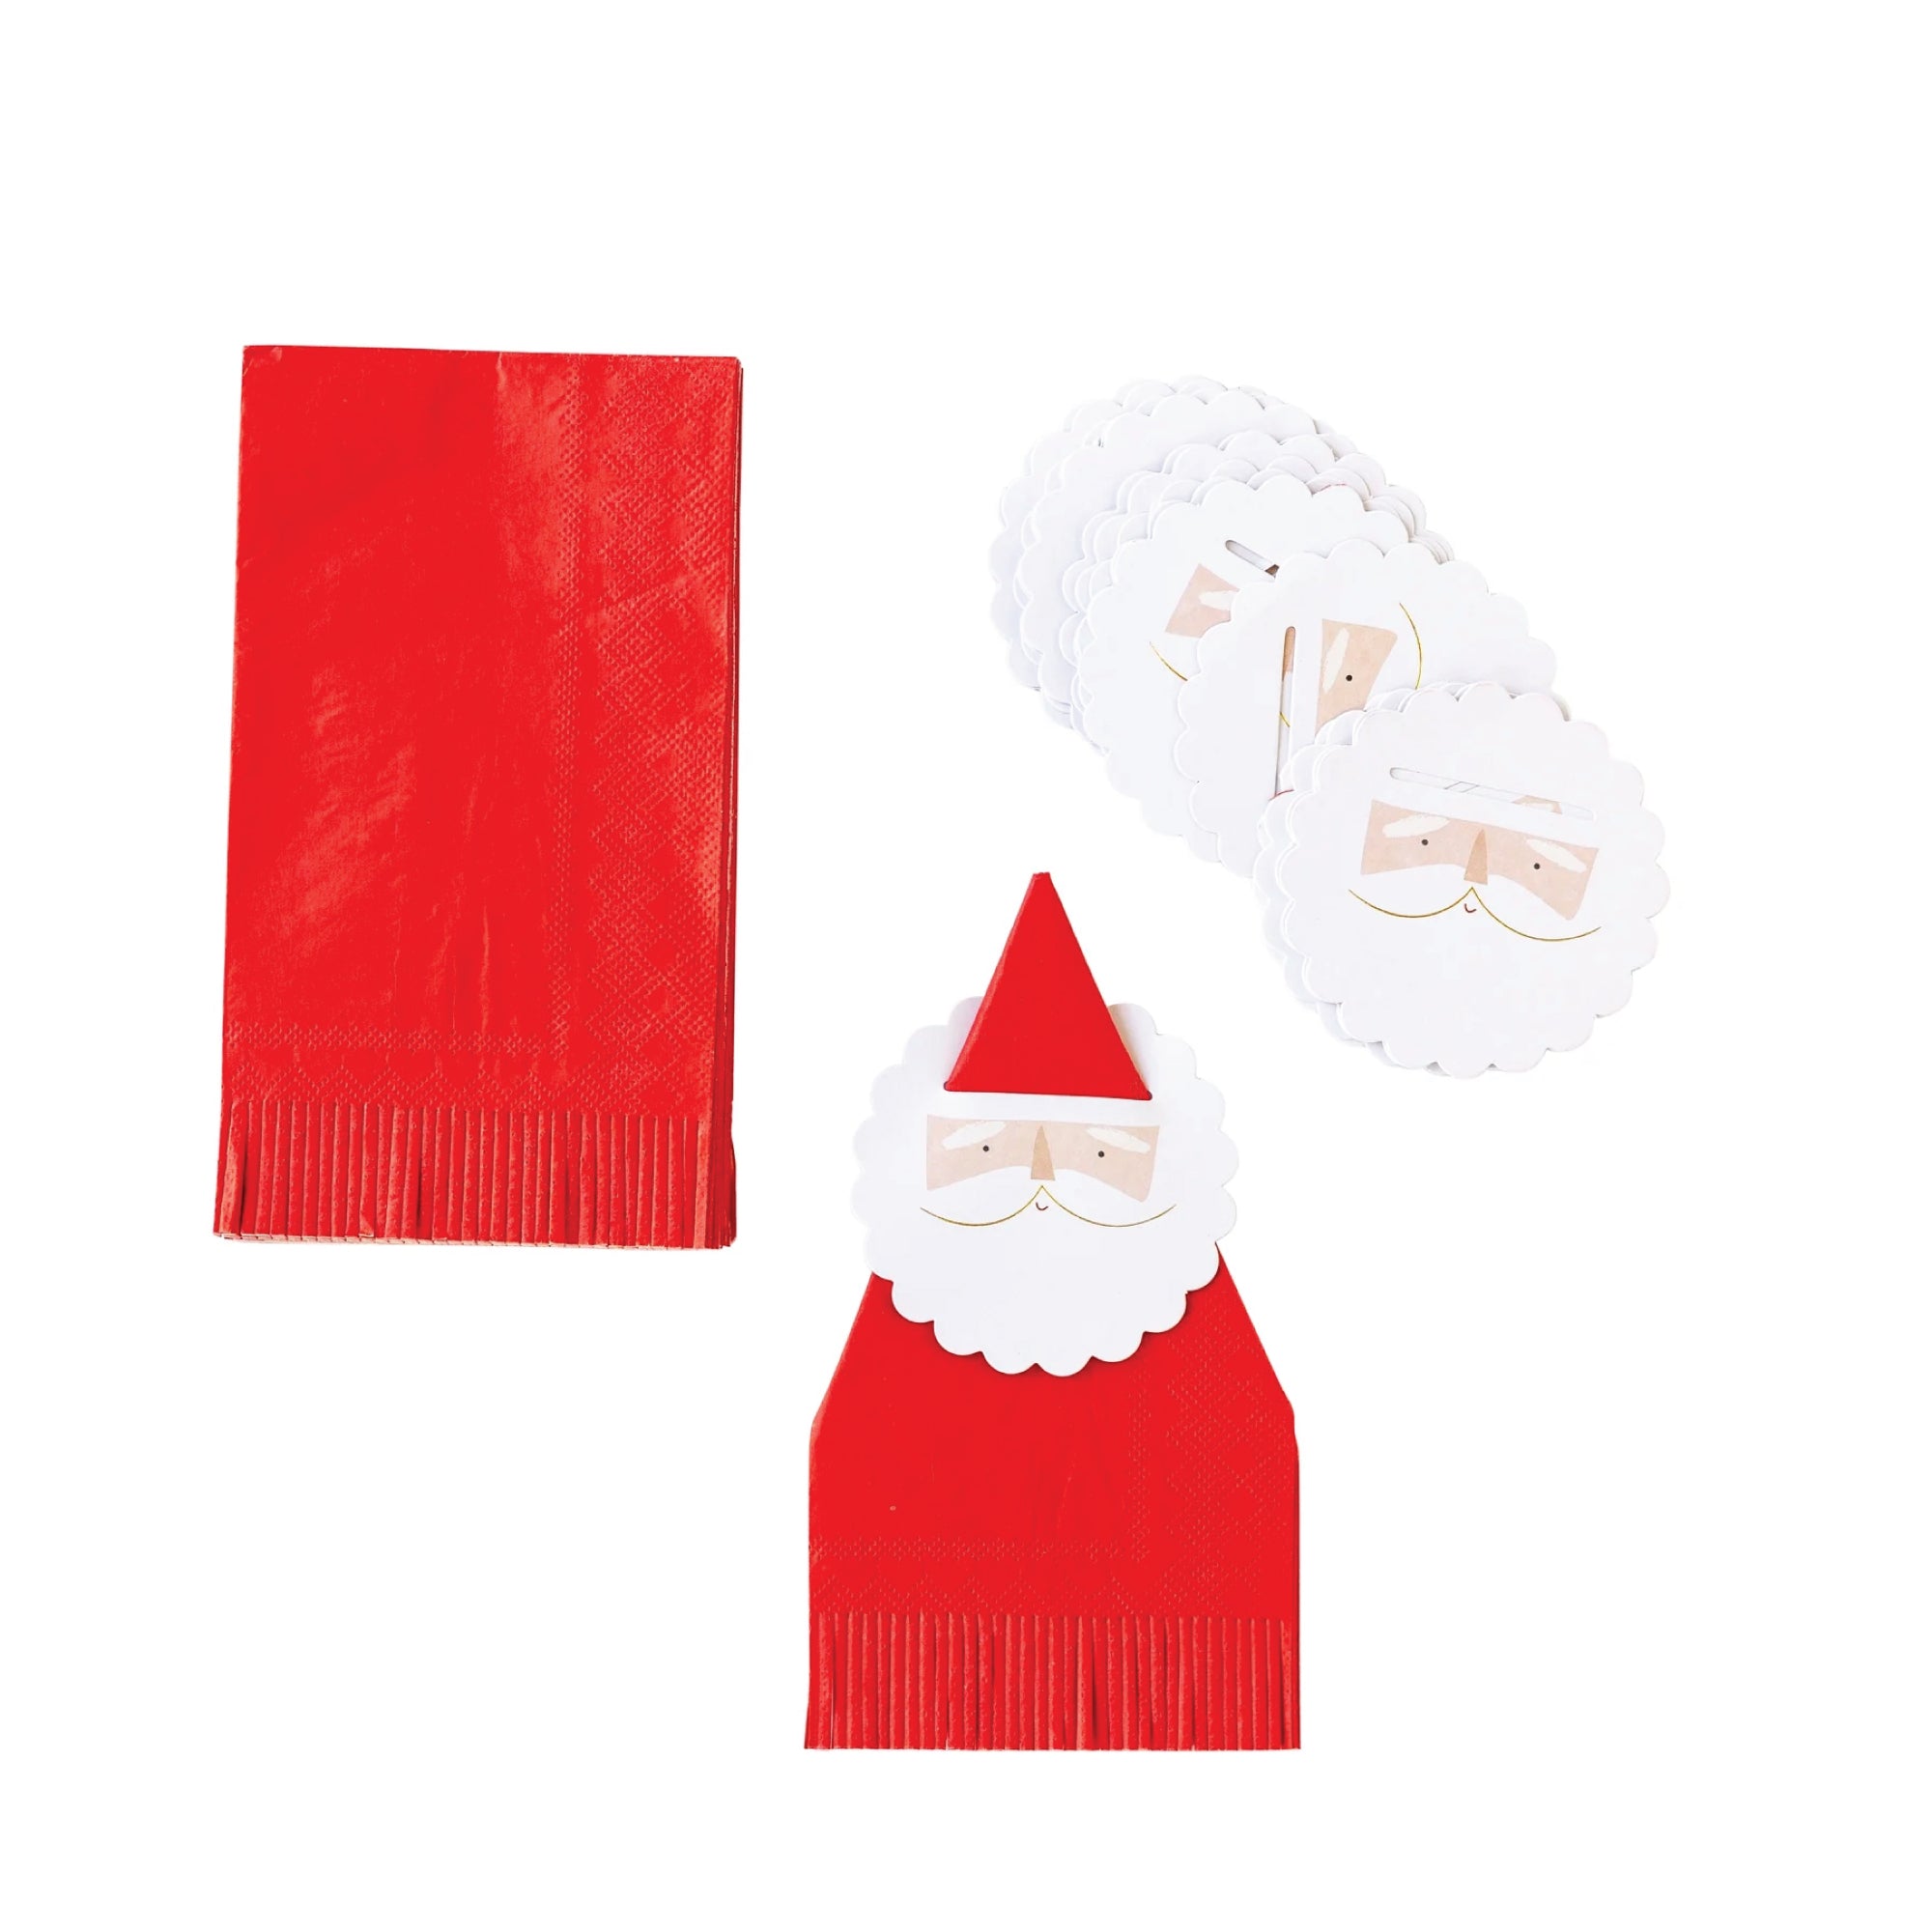 Santa Napkin Rings & Red Fringe Guest Towels 18ct | The Party Darling